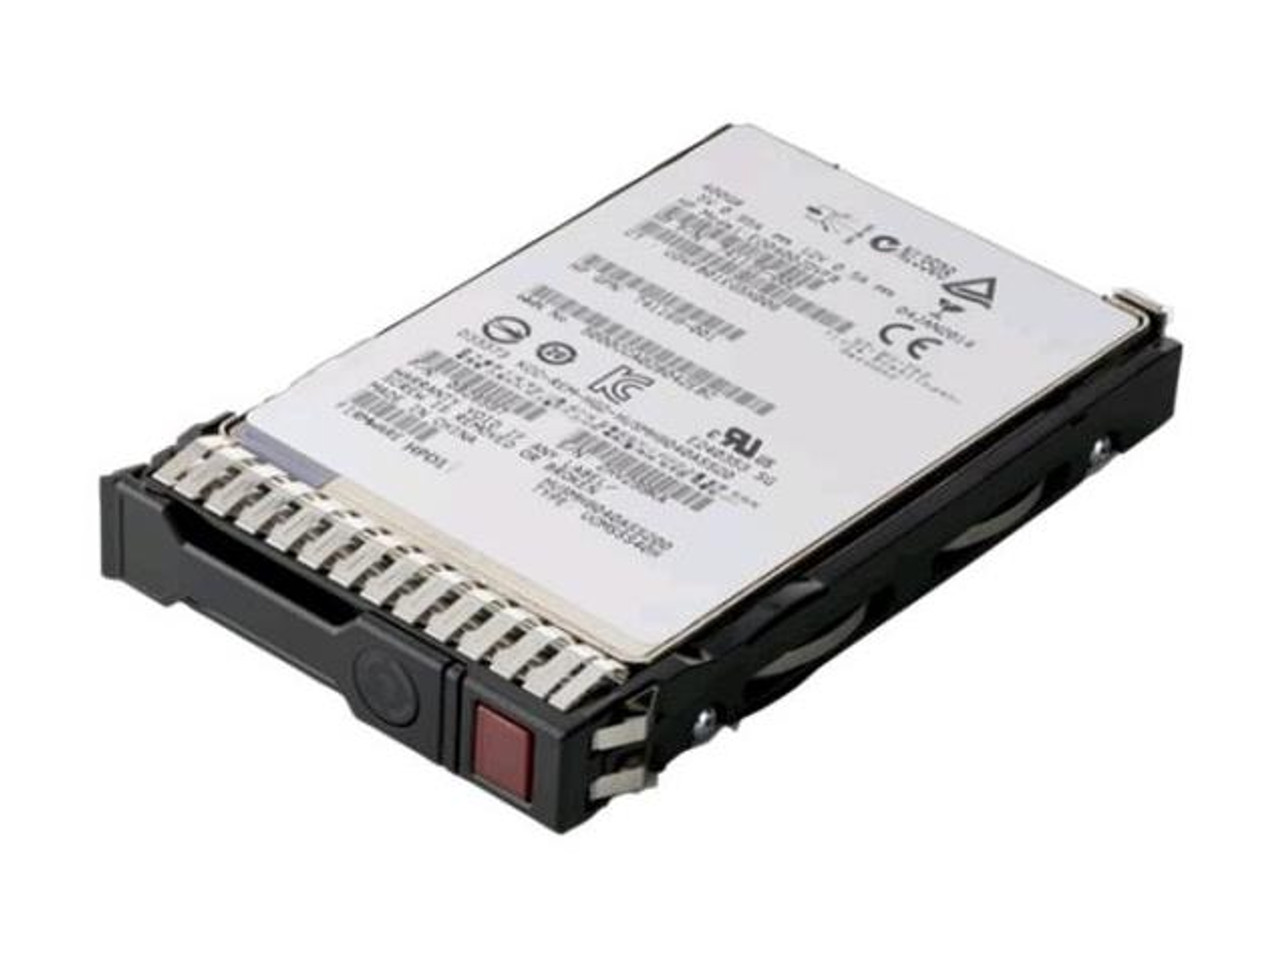 881457-H21 HPE 2.4TB 10000RPM SAS 12Gbps (512e) 2.5-inch Internal Hard Drive with Smart Carrier